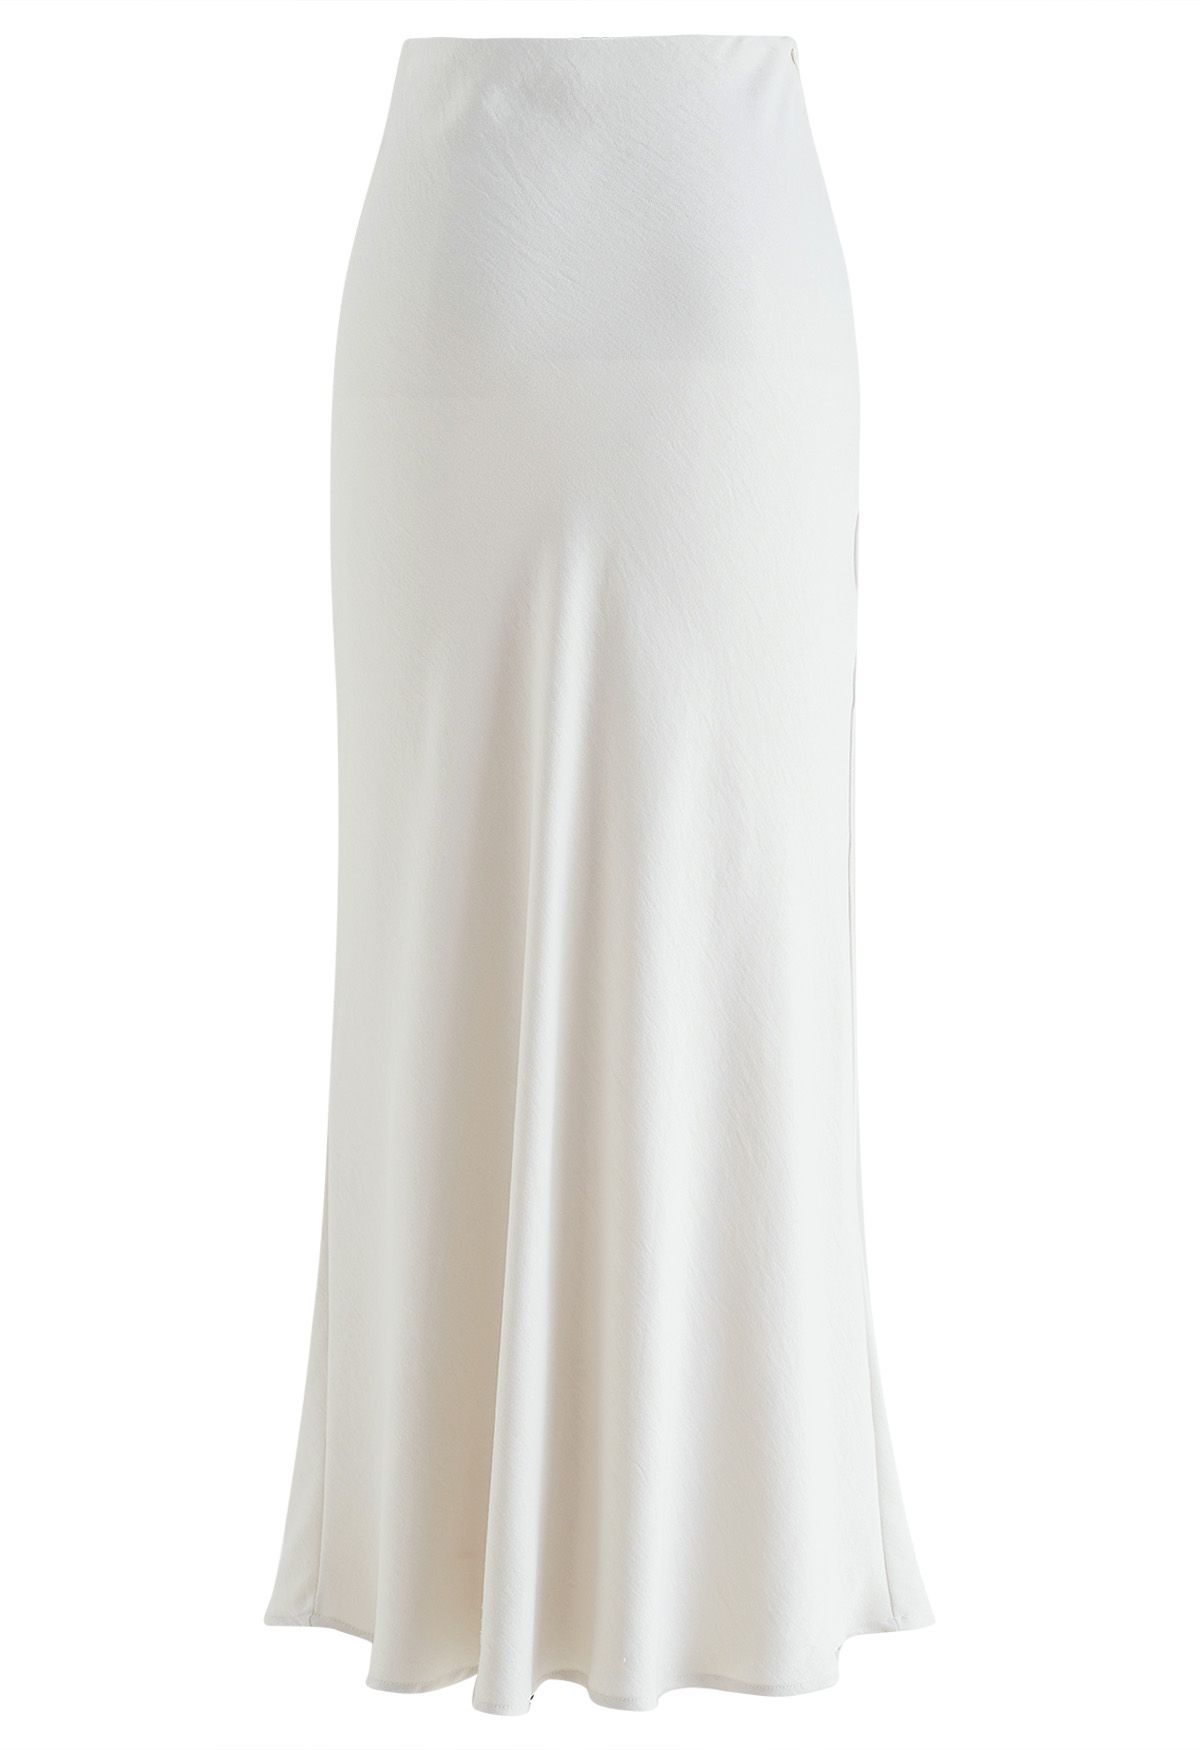 Simple Elegance Solid Color Maxi Skirt in Ivory - Retro, Indie and ...